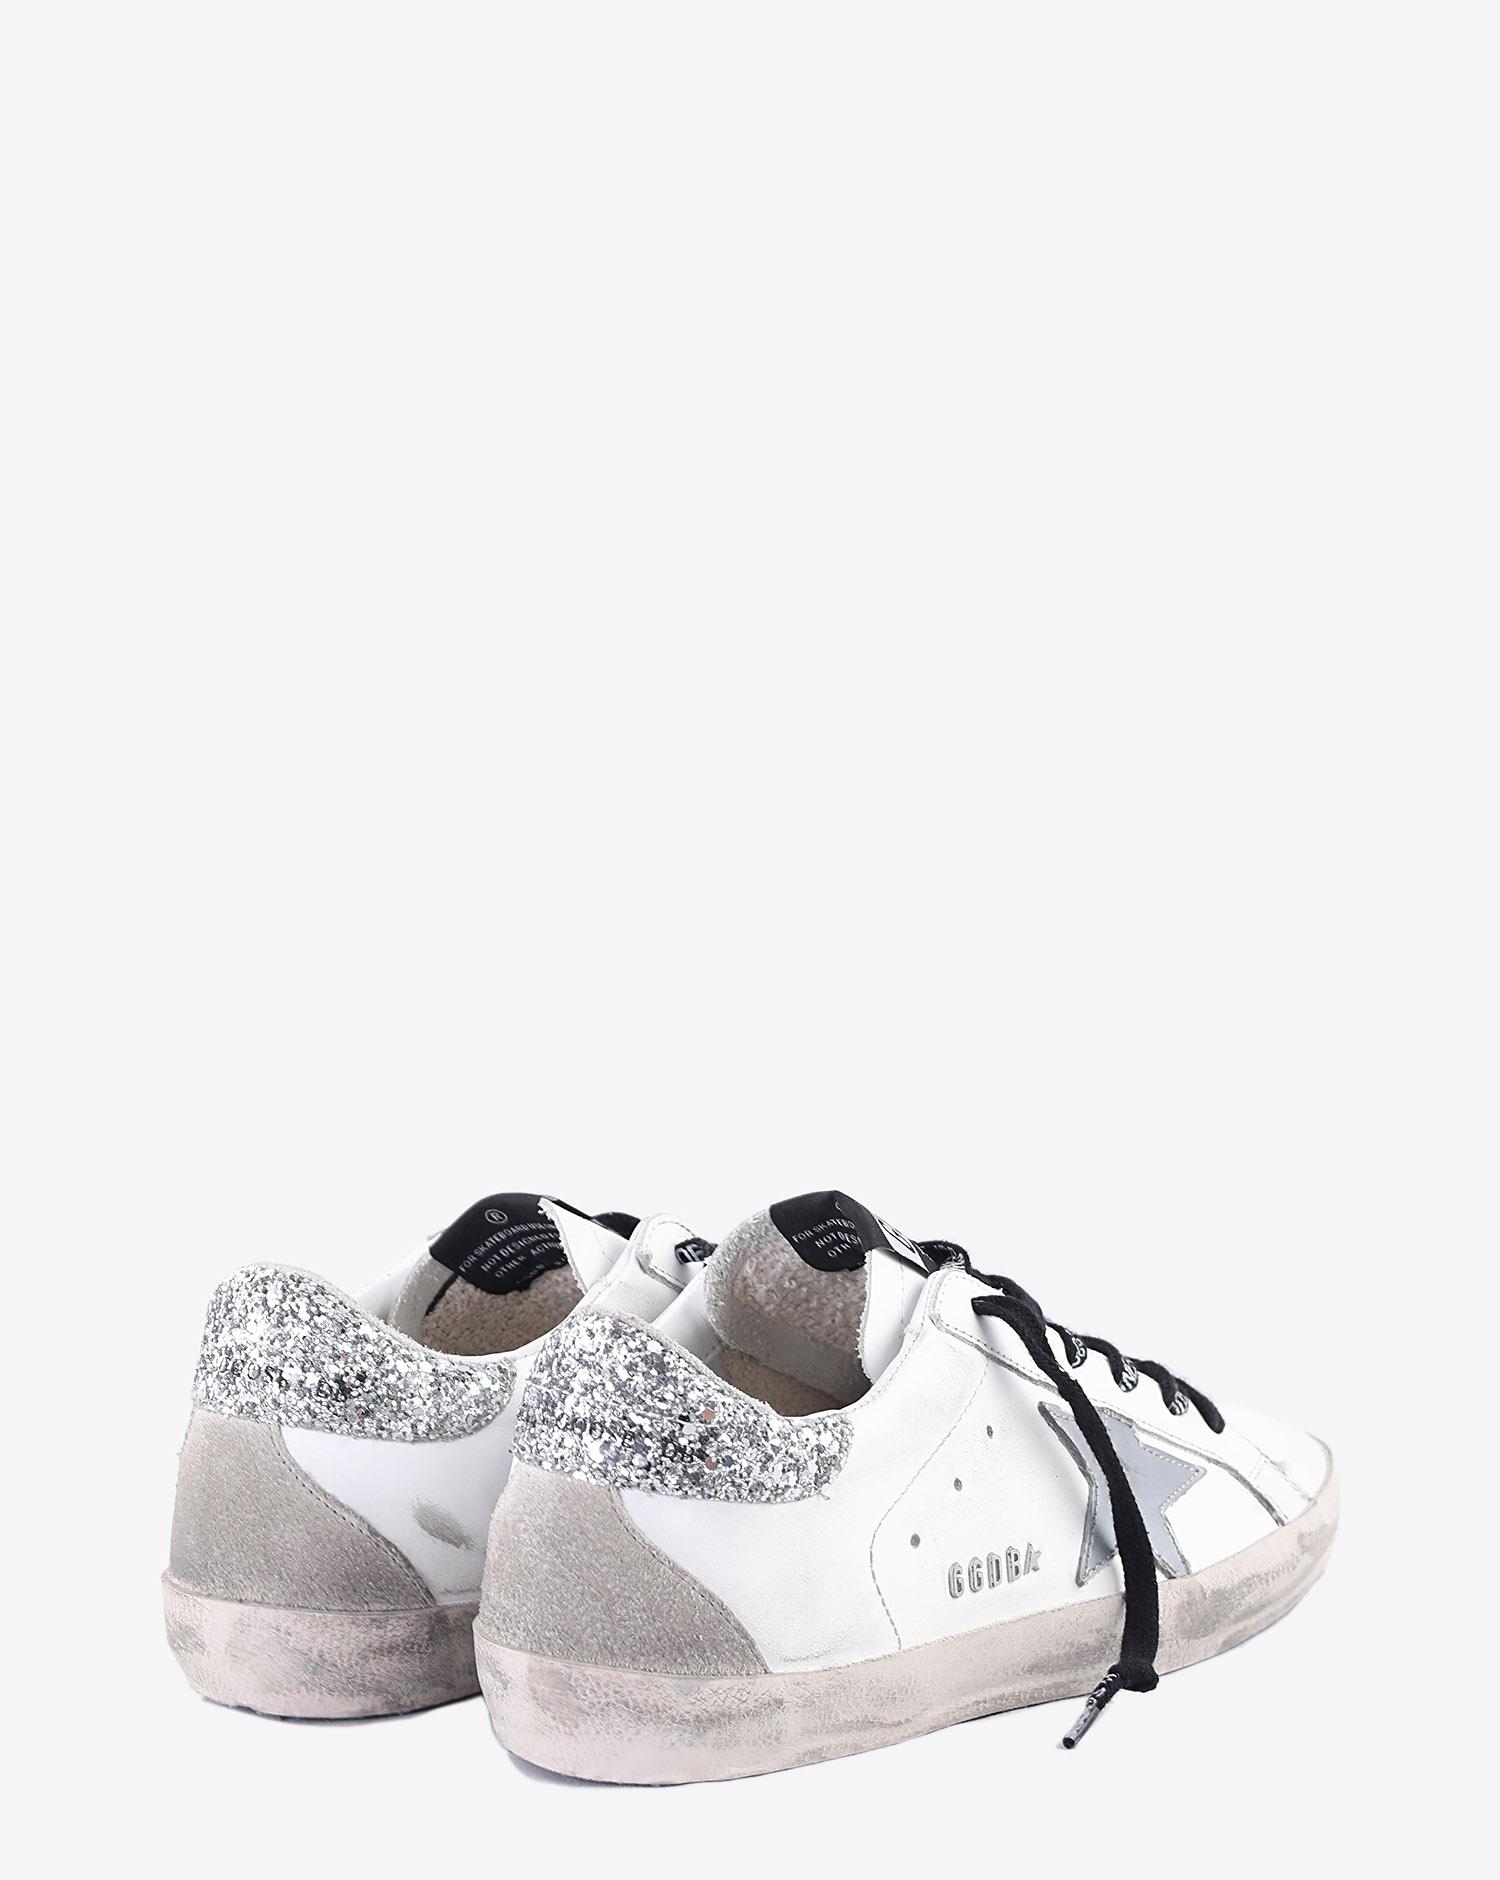 Golden Goose Woman Collection Sneakers Superstar - White - Silver Glitter - Metal Lettering  